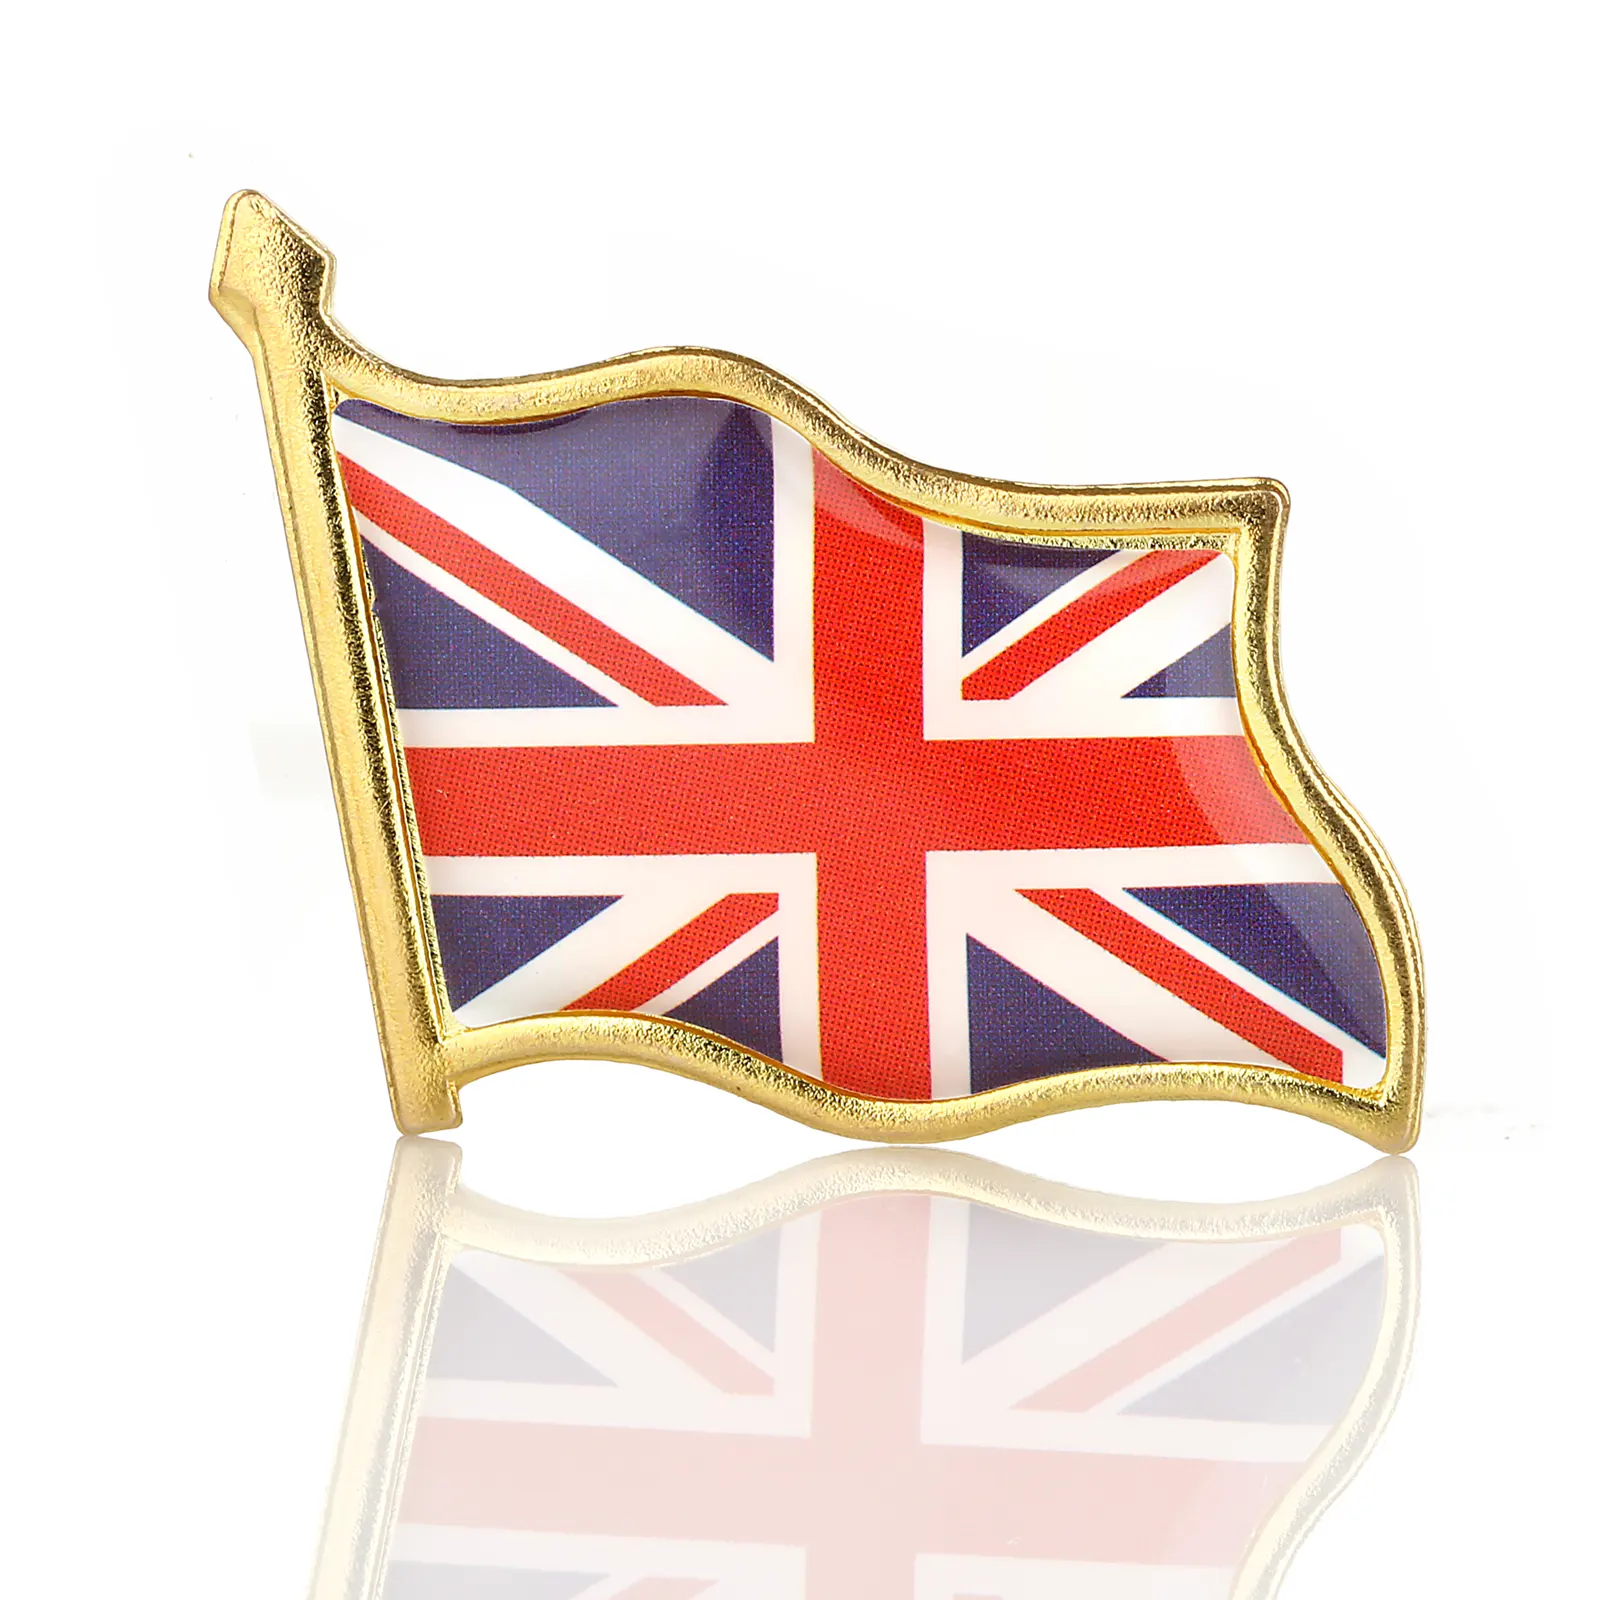 Union Jack Pin Badge - UK Flagge als Anstecknadel aus Metall & Emaille